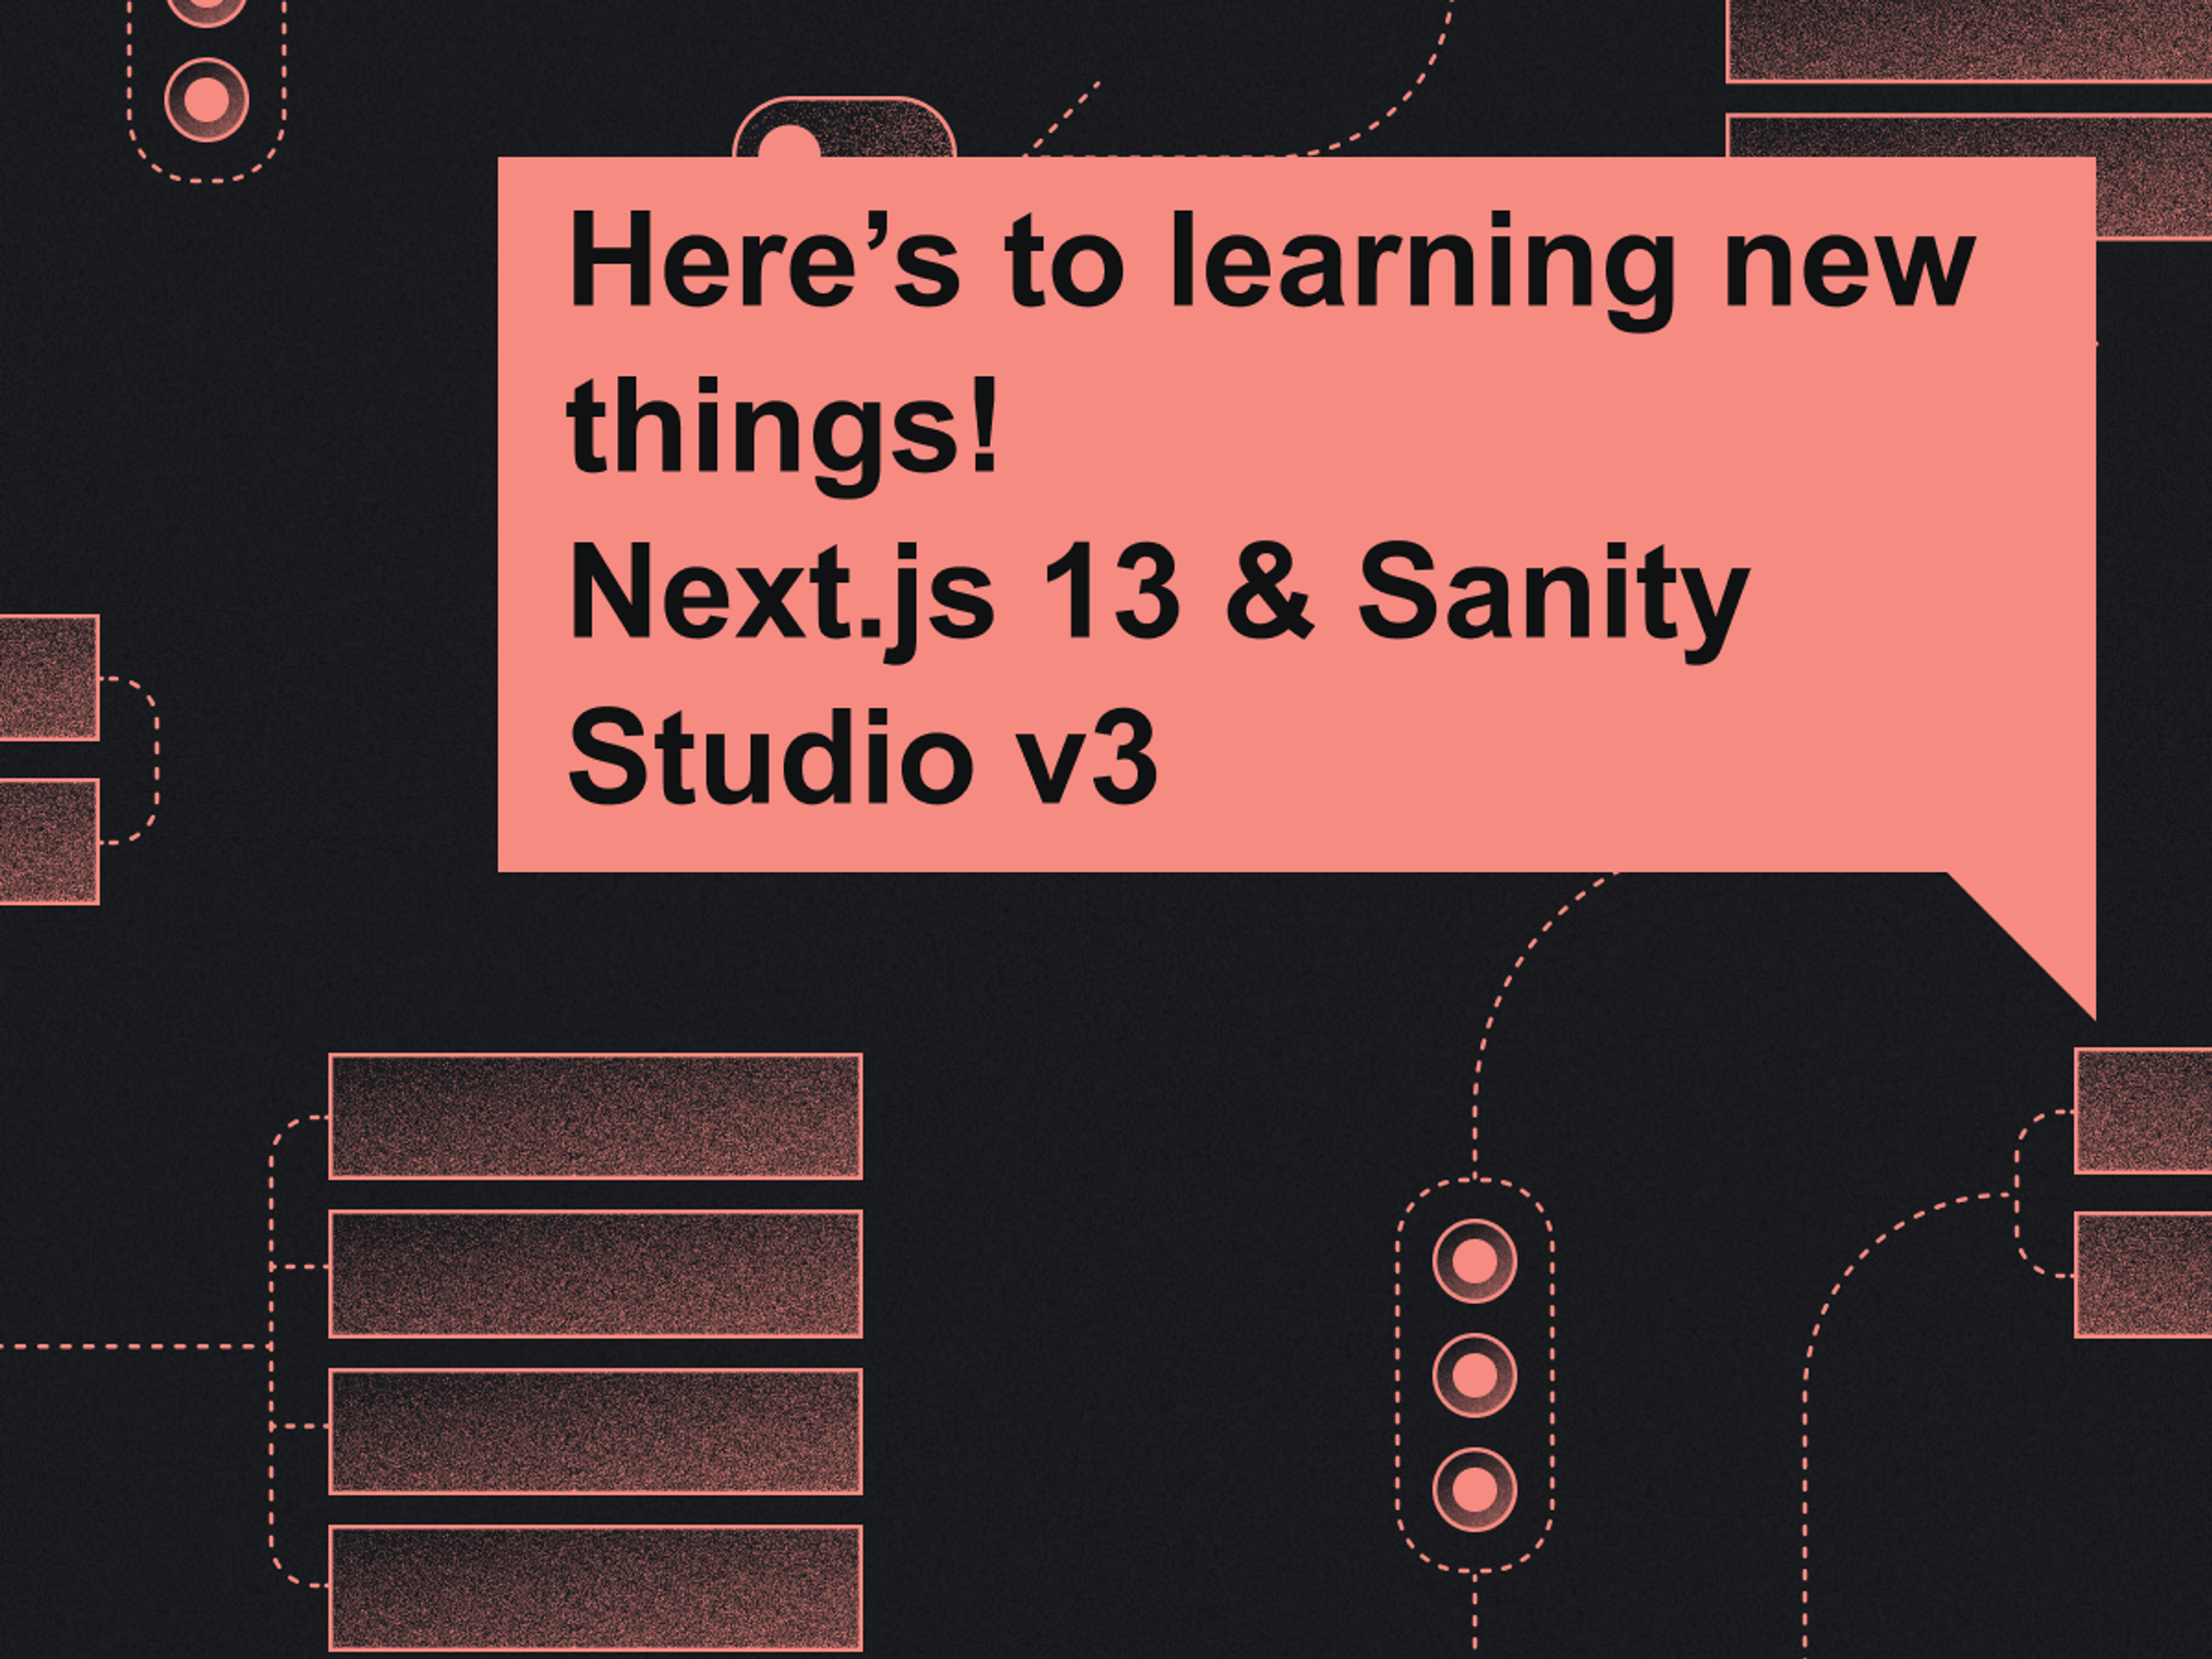 Here's to learning new things! Next.js 13 & Sanity Studio v3